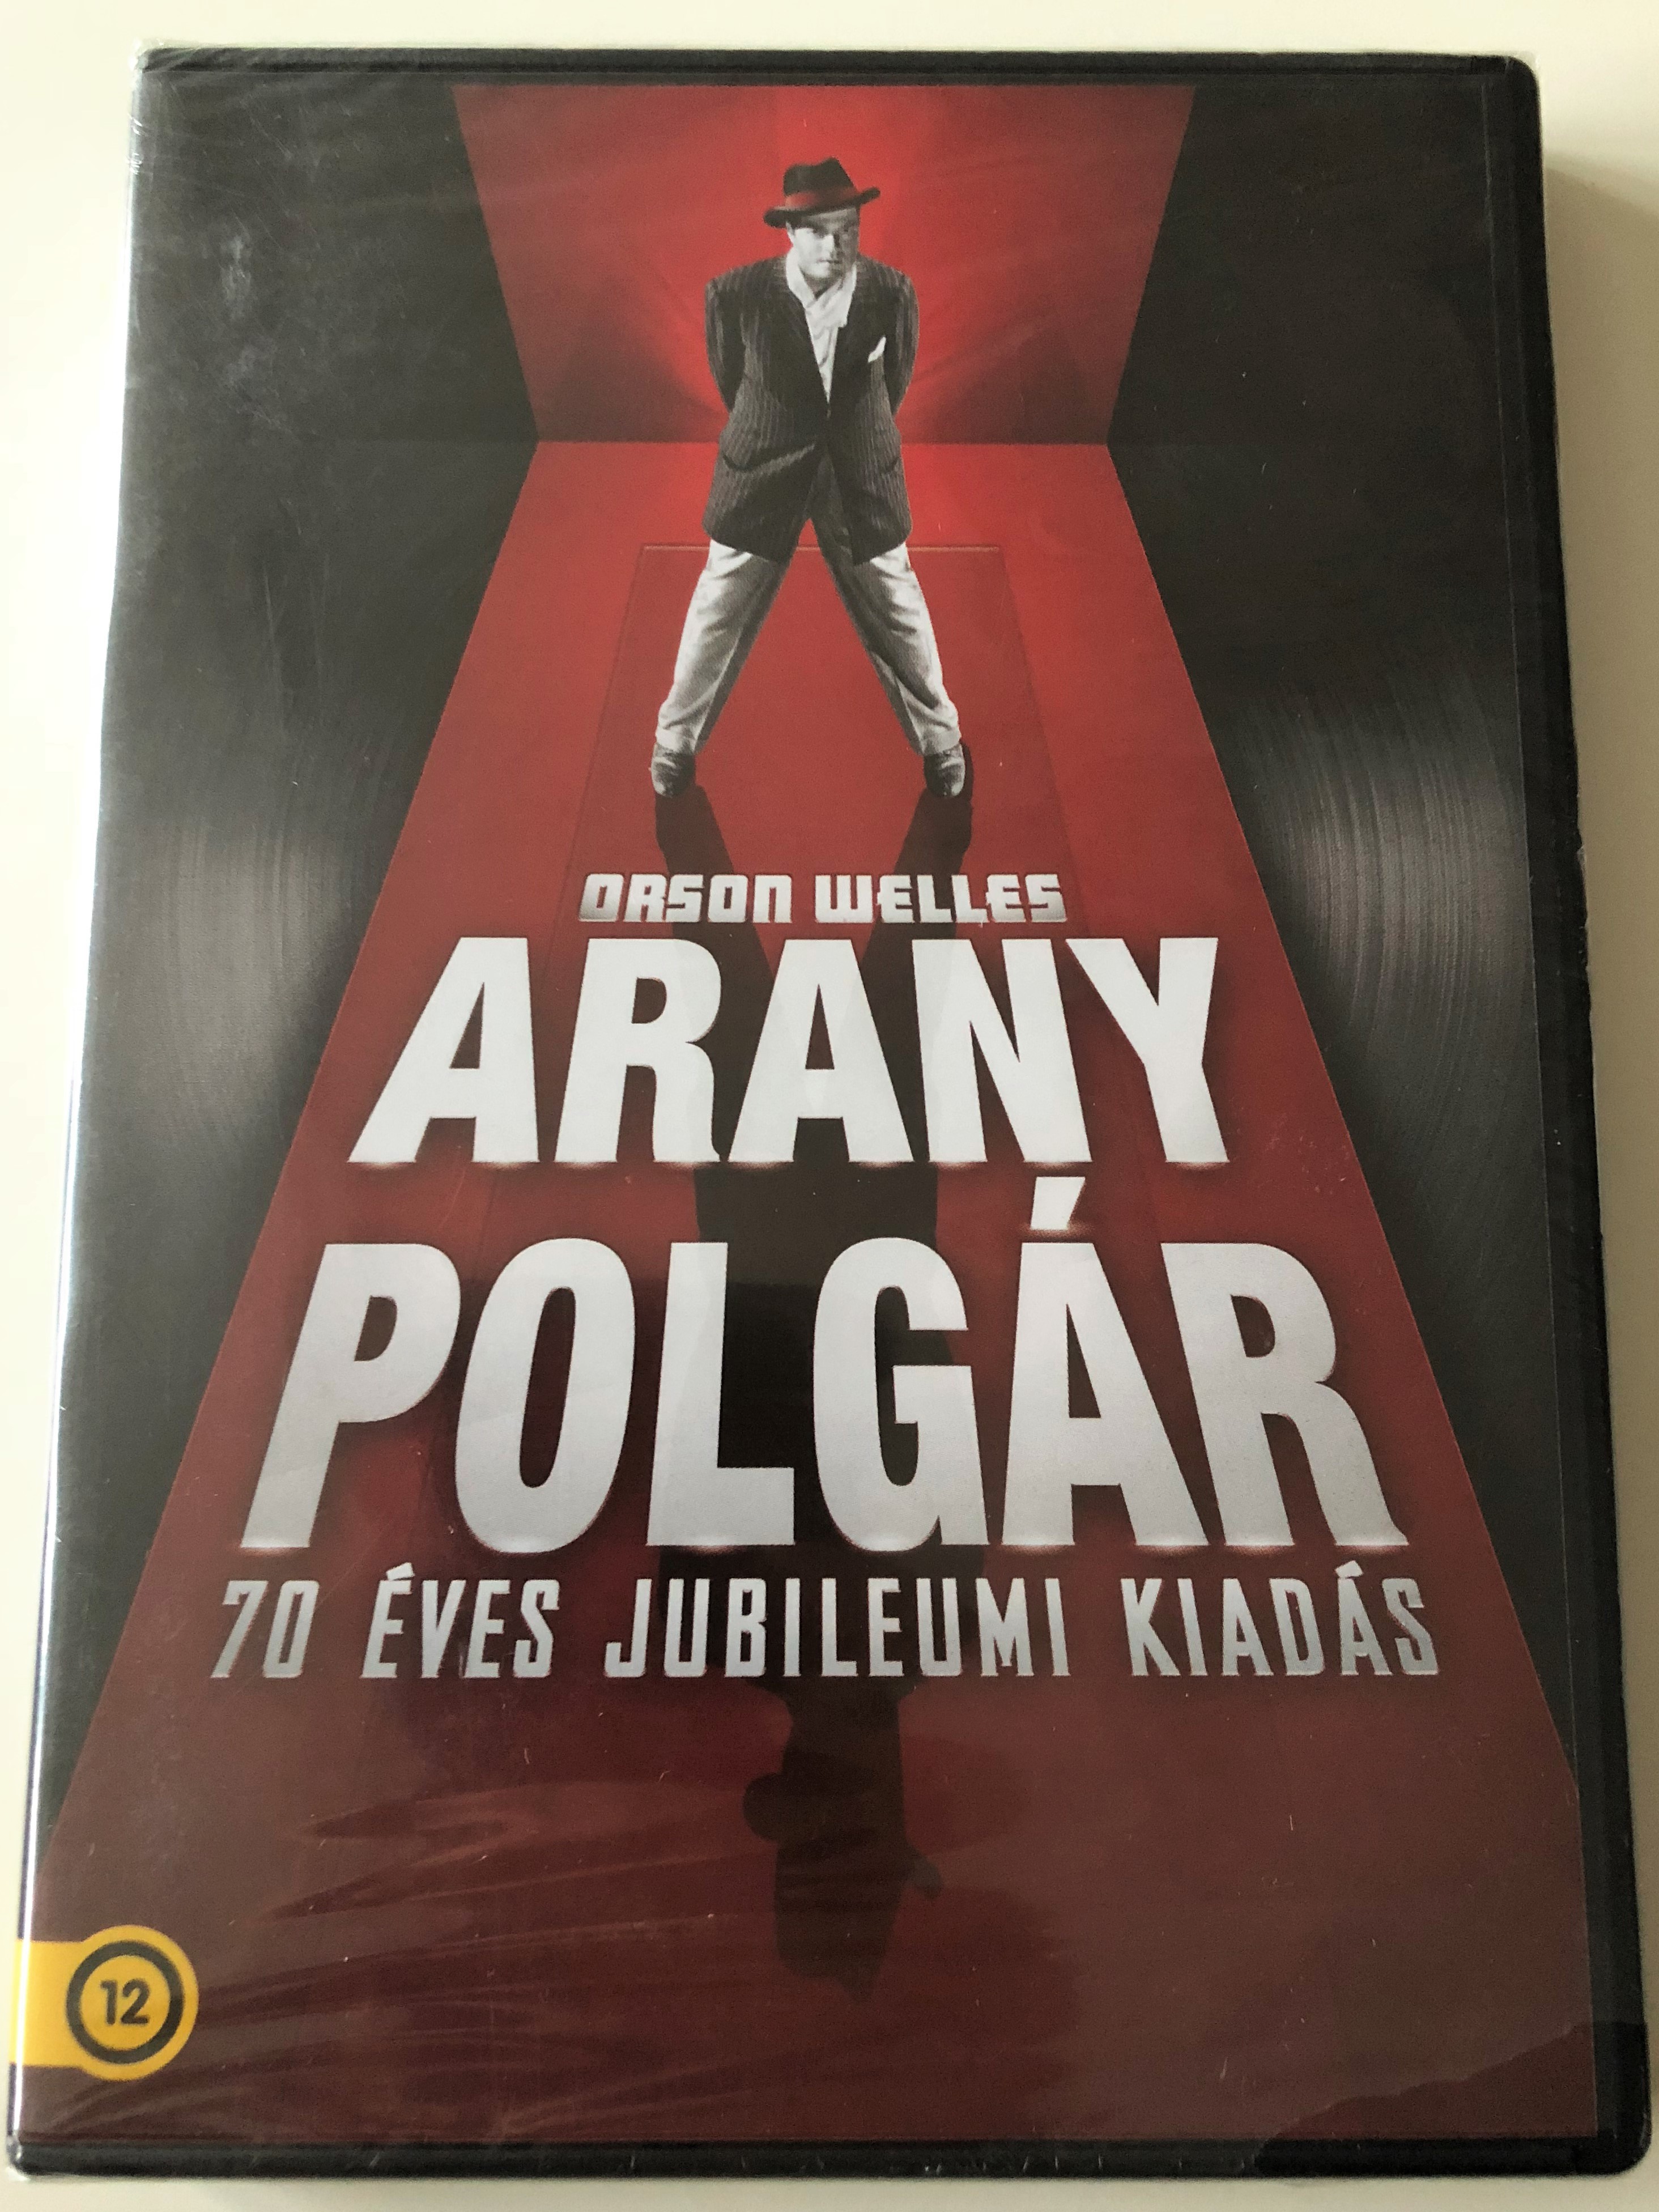 aranypolg-r-citizen-kane-in-hungarian-language-dvd-2011-70th-anniversary-ultimate-collector-s-edition-directed-by-orson-welles-starring-orson-welles-joseph-cotten-dorothy-comingore-1-.jpg